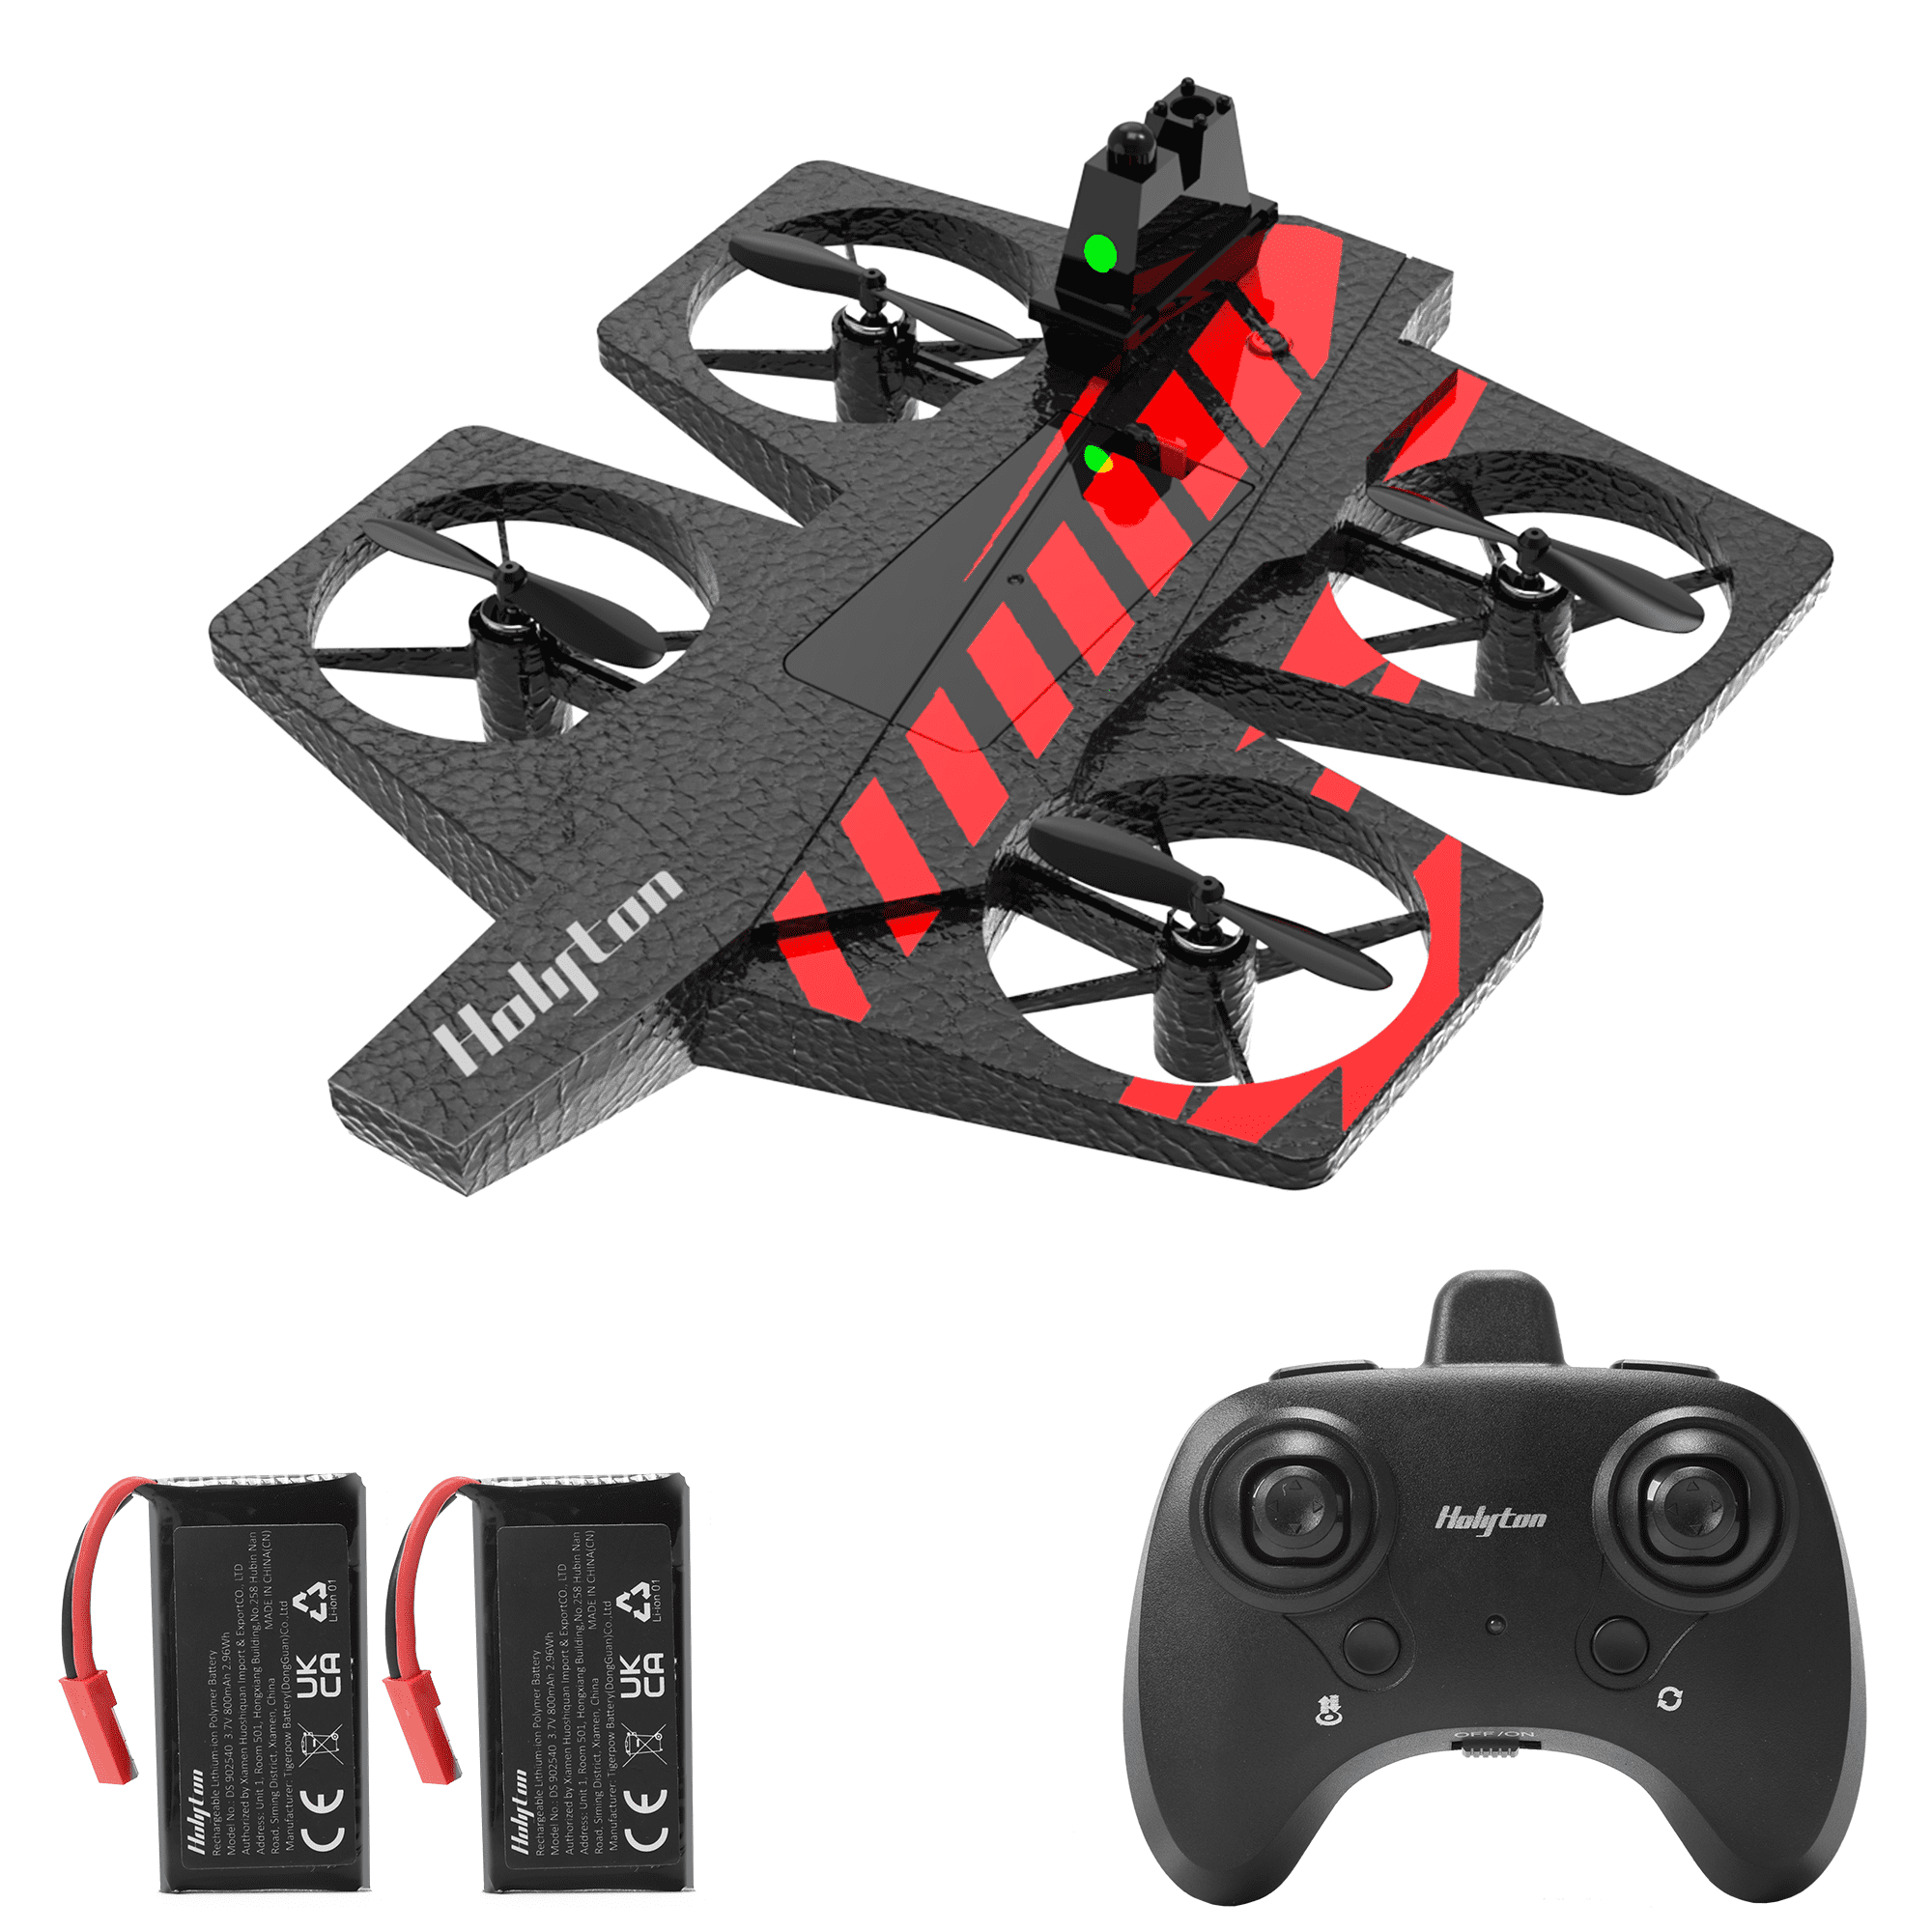 TECHBOY TB-802 RC Quadcopter 2.4GHz six axis Remote Control One 